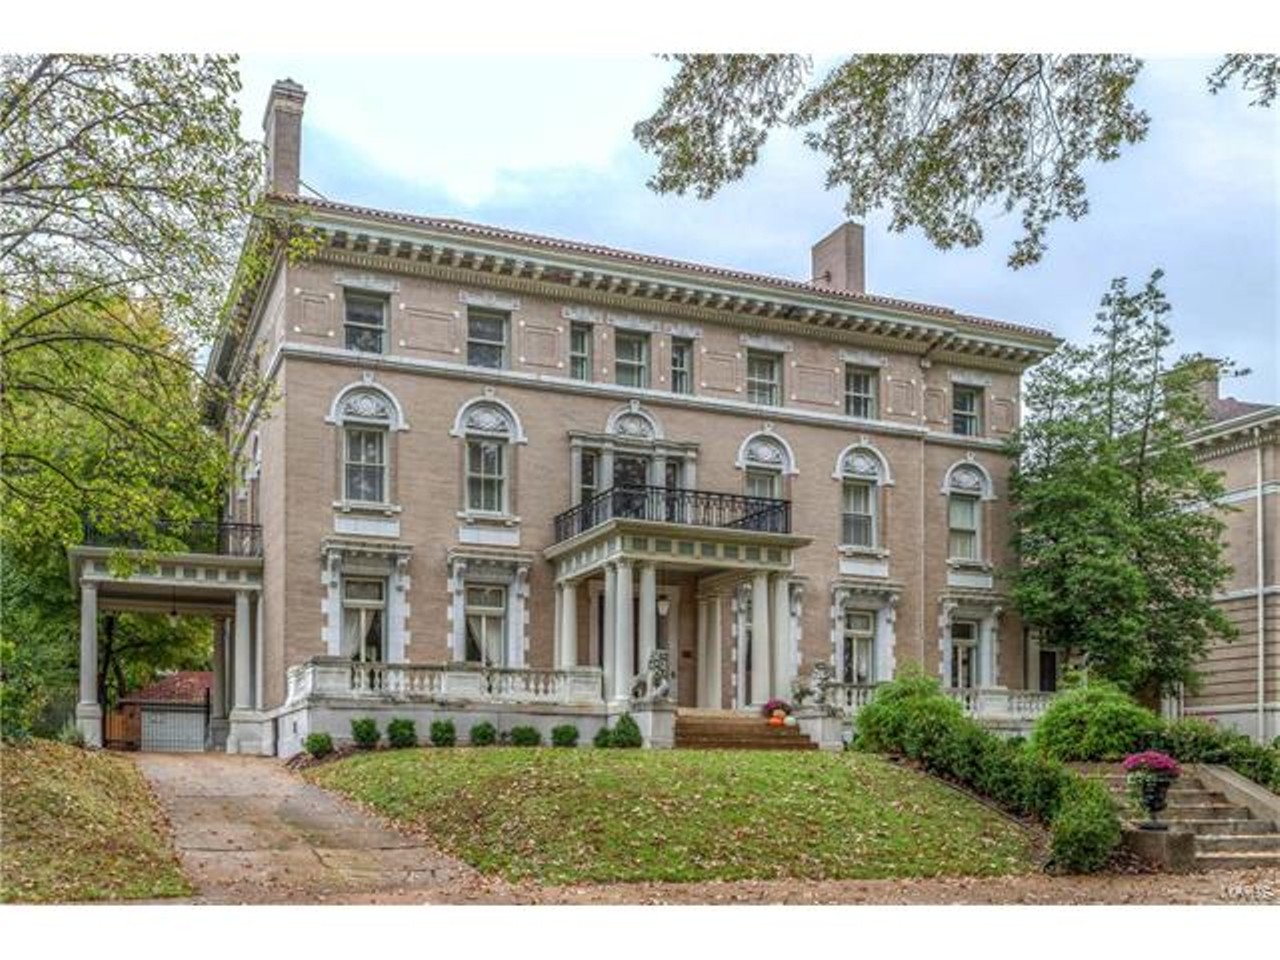 37 Washington Terrace Terr
St Louis, MO 63112
$1,275,000
7 beds, 6 baths, 9,667 sqft
This home is on the National Registry of Historic Places and is 114 years old -- and we feel it's safe to say it's never looked better. It includes a foyer, a "music parlor" (yes, apparently that's a thing), a living room, a circular solarium, a dining room and a library with its original built-in desk. We're particularly fans of the private garden and the pool. Spoiler alert for shopoholics: you'll love the master bedroom closets.